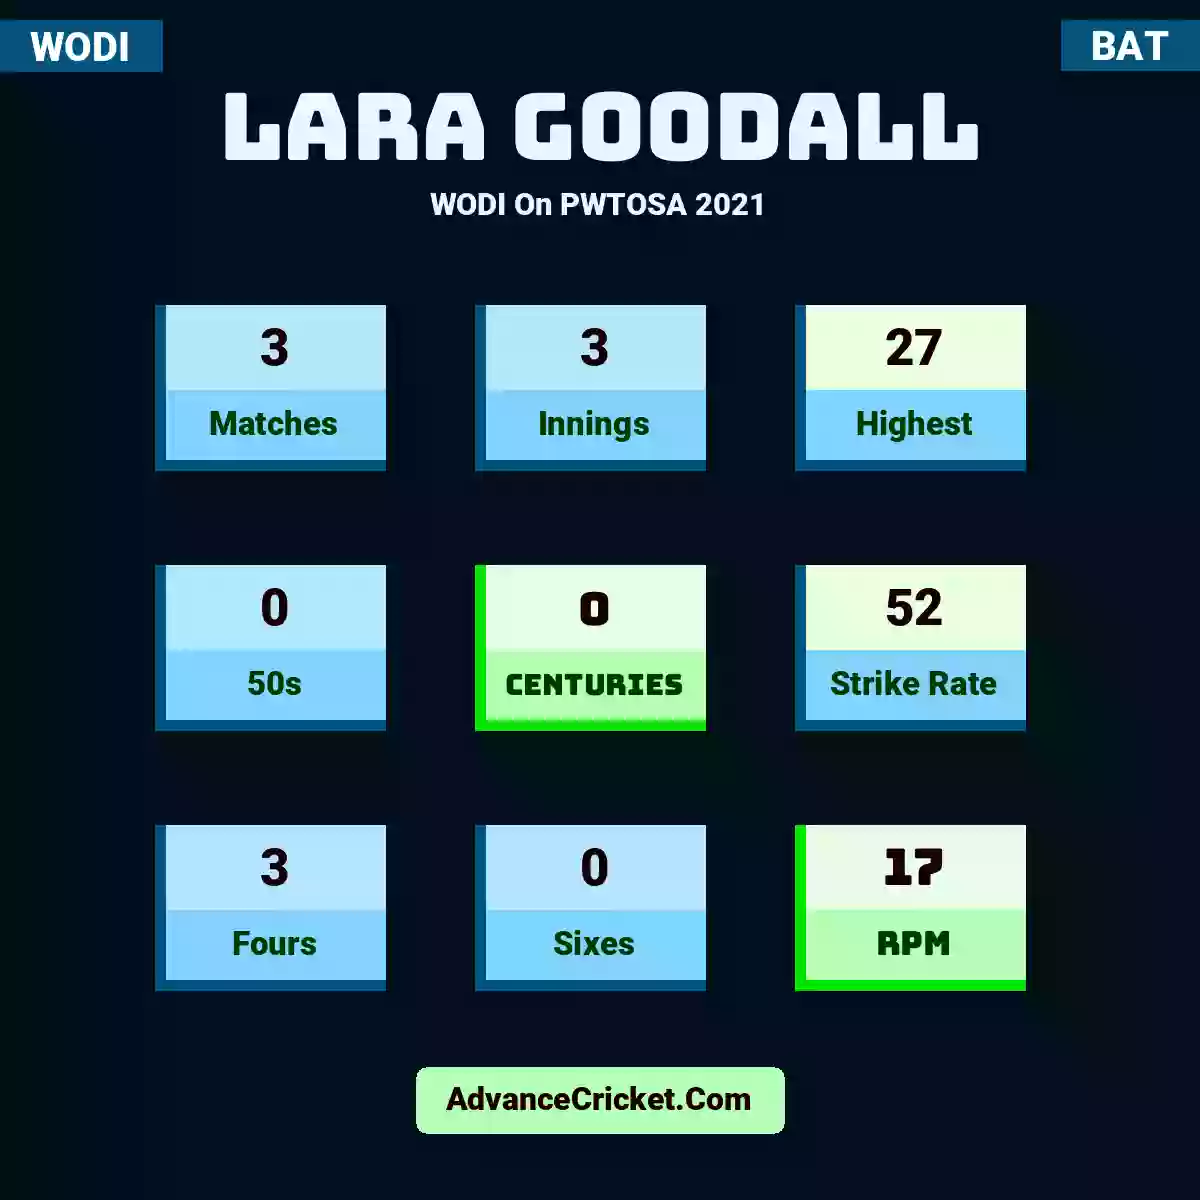 Lara Goodall WODI  On PWTOSA 2021, Lara Goodall played 3 matches, scored 27 runs as highest, 0 half-centuries, and 0 centuries, with a strike rate of 52. L.Goodall hit 3 fours and 0 sixes, with an RPM of 17.